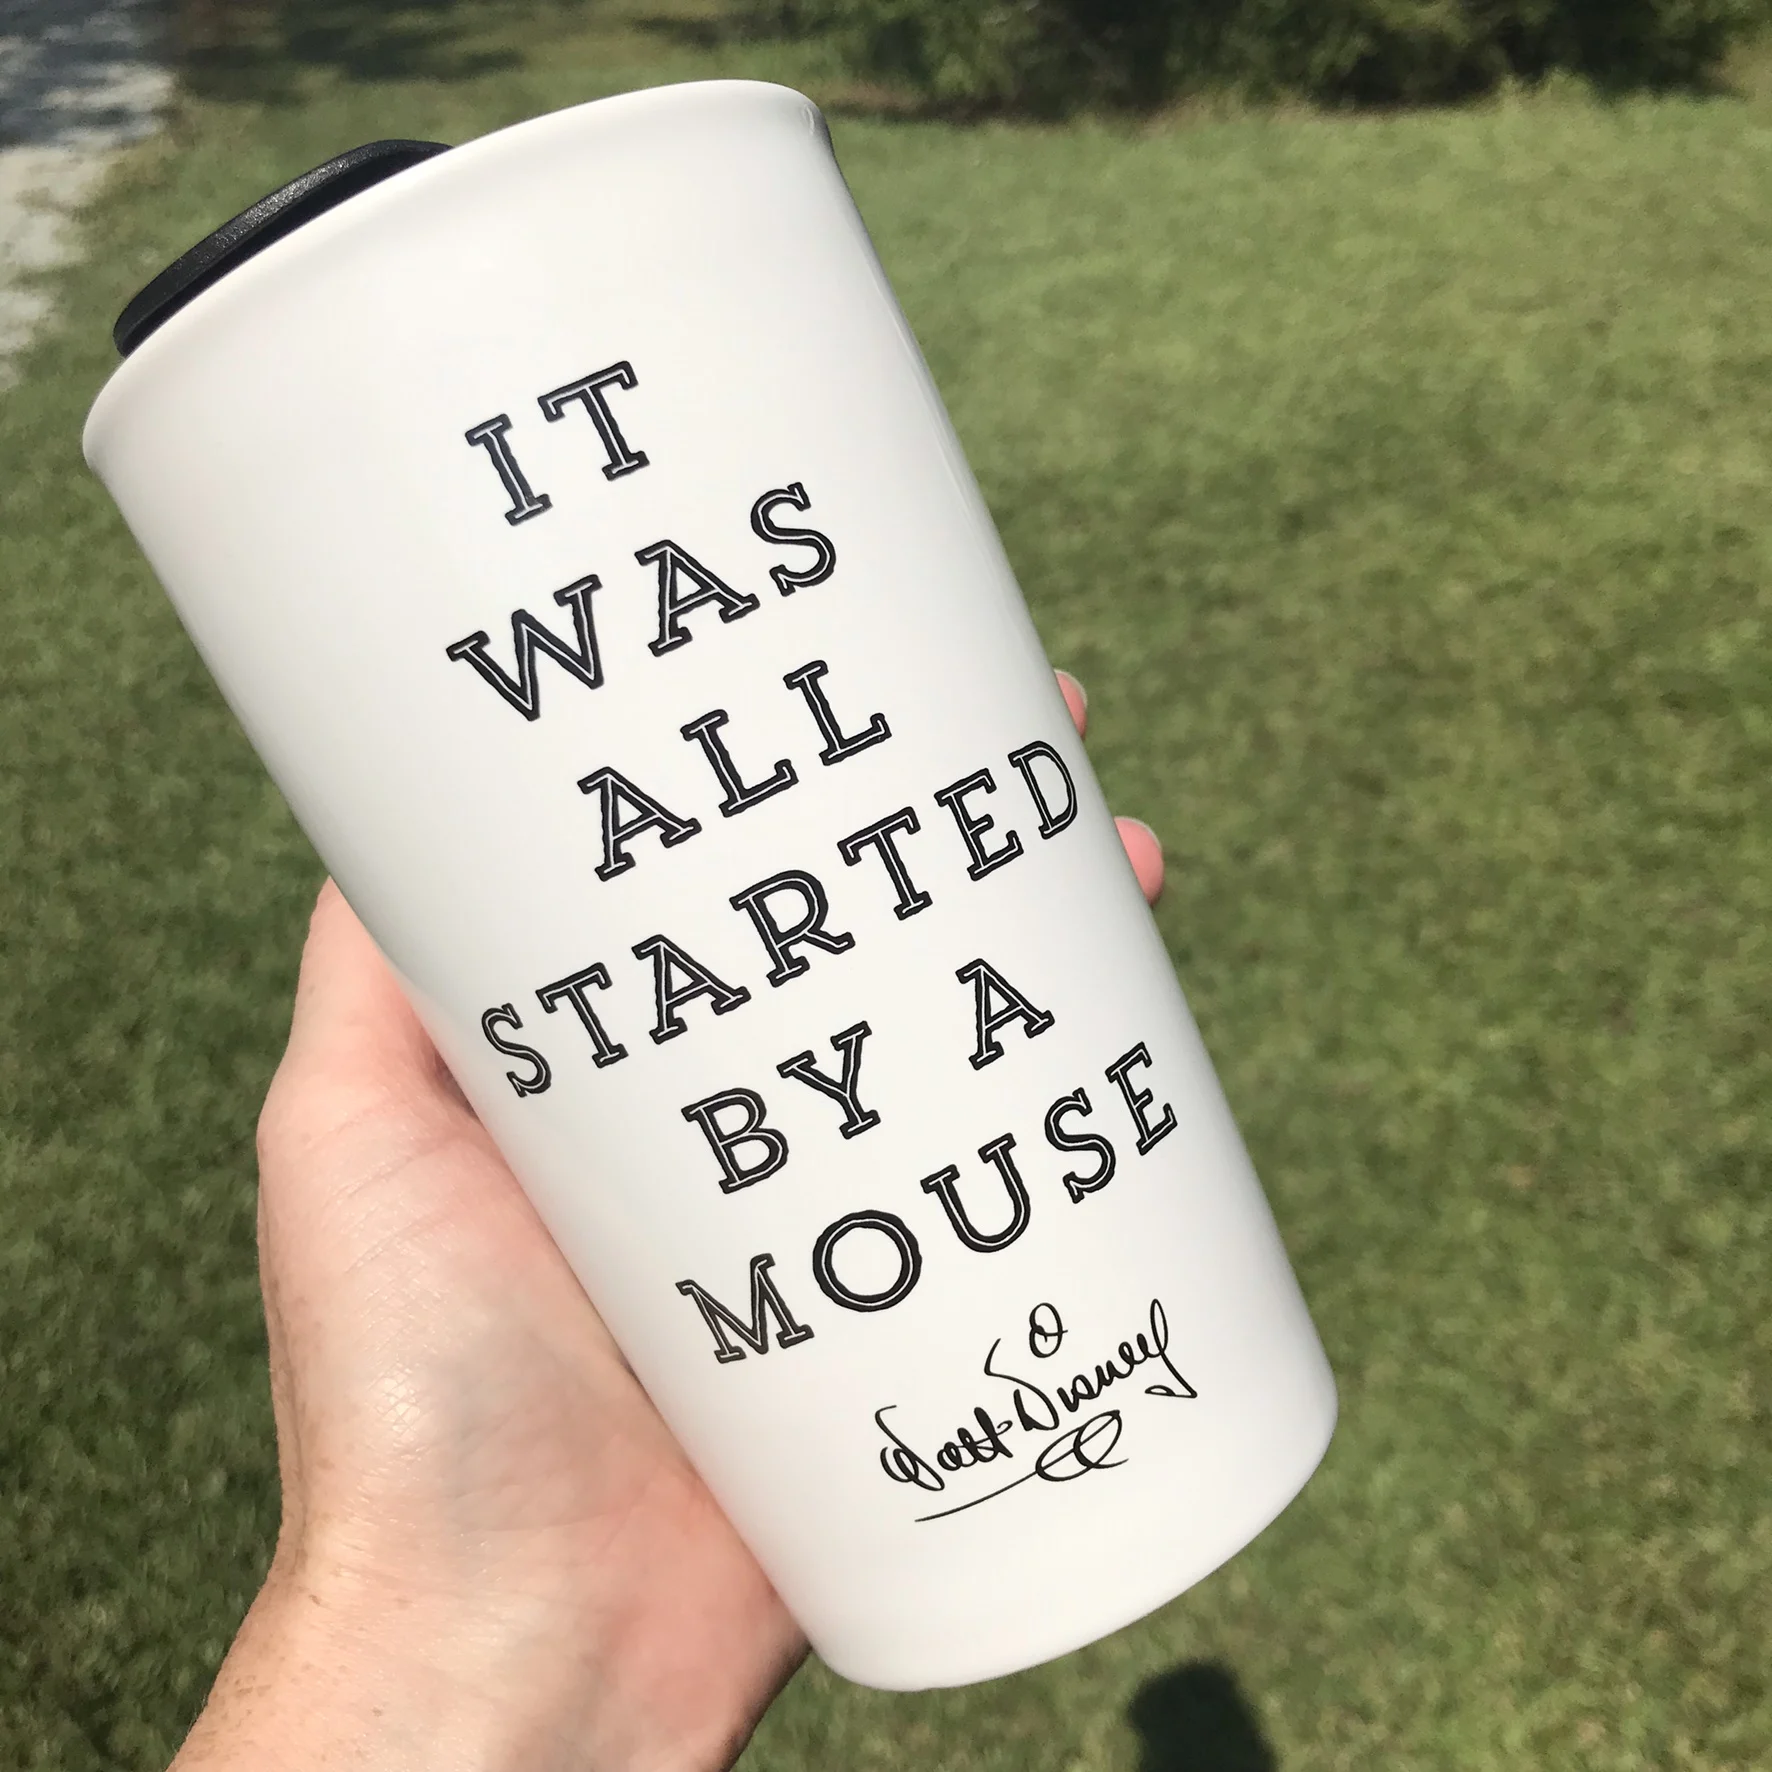 back of the mug with saying - it was all started by a mouse